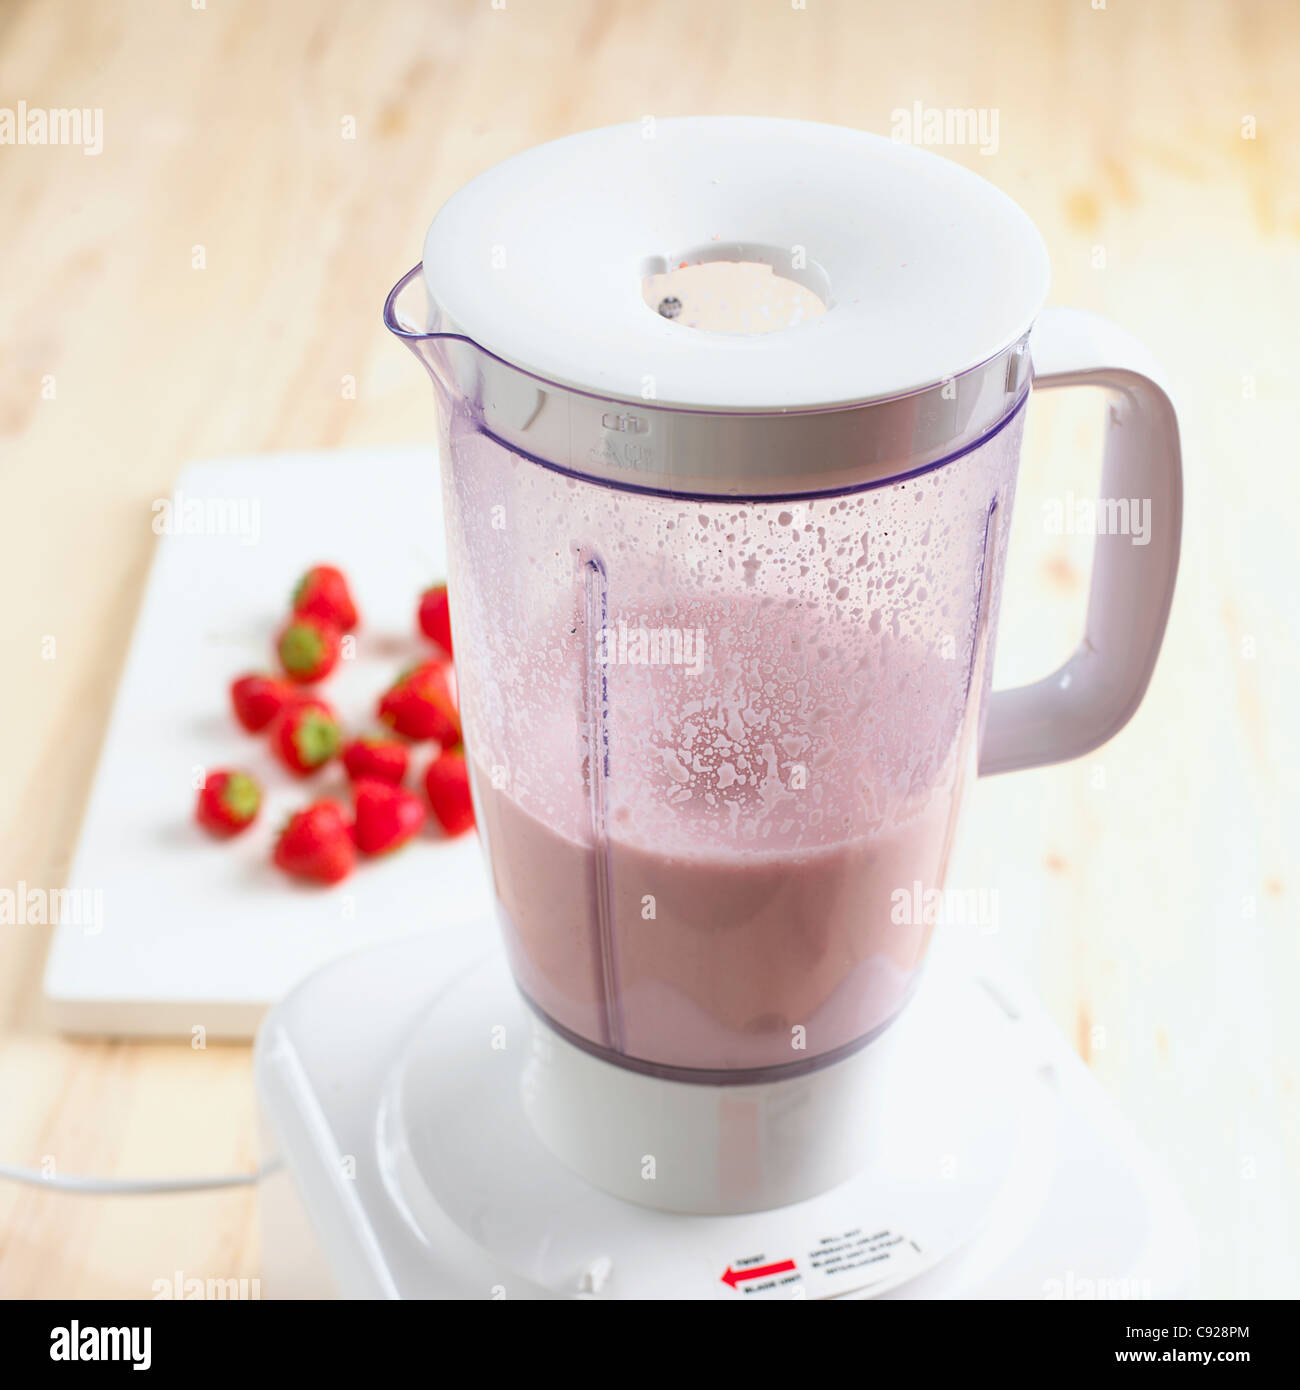 Strawberry smoothie in blender Stock Photo